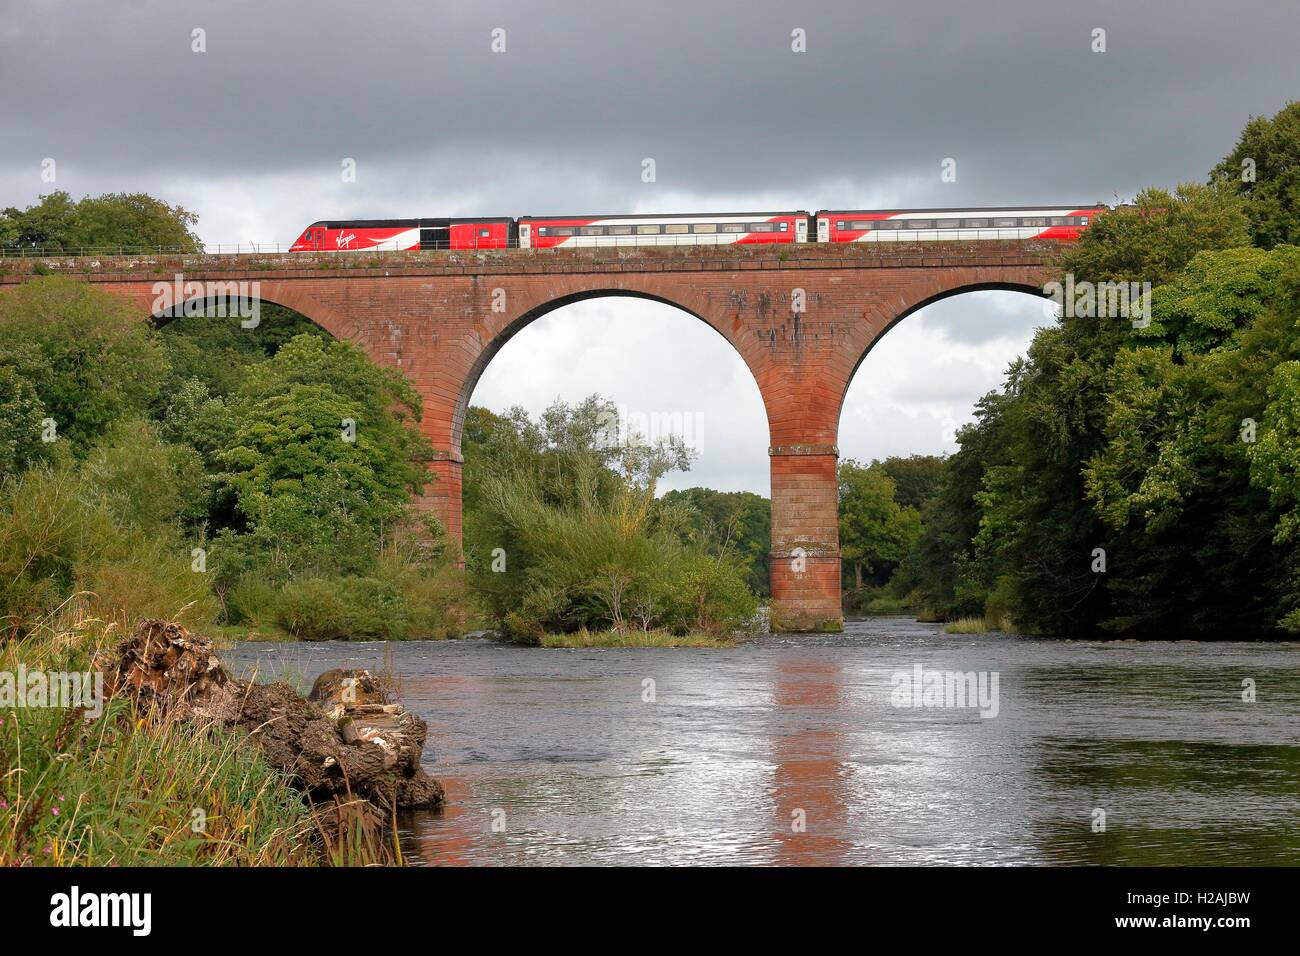 Virgin InterCity 125 crossing Wetheral Viaduct over the River Eden. Wetheral, Newcastle & Carlisle Railway, Cumbria, England. Stock Photo